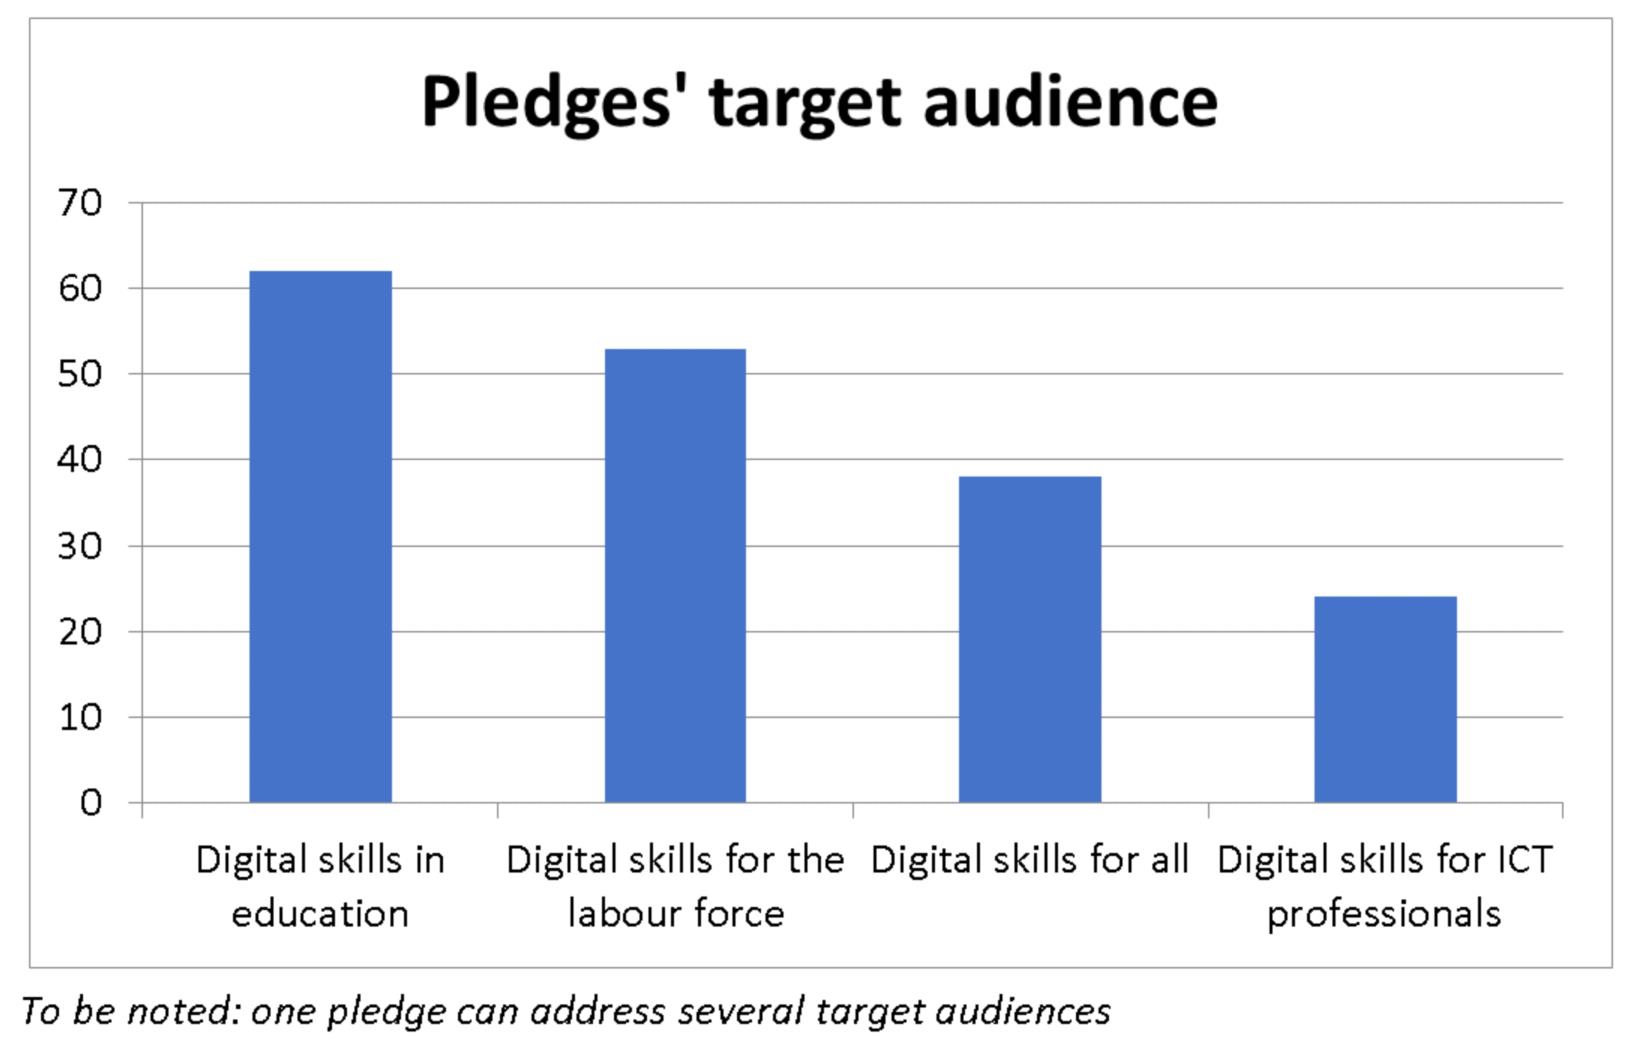 Bar chart with pledges' target audience from highest to lowest: digital skills in education, digital skills for the labour forces, digital skills for all, digital skills for ICT professionals